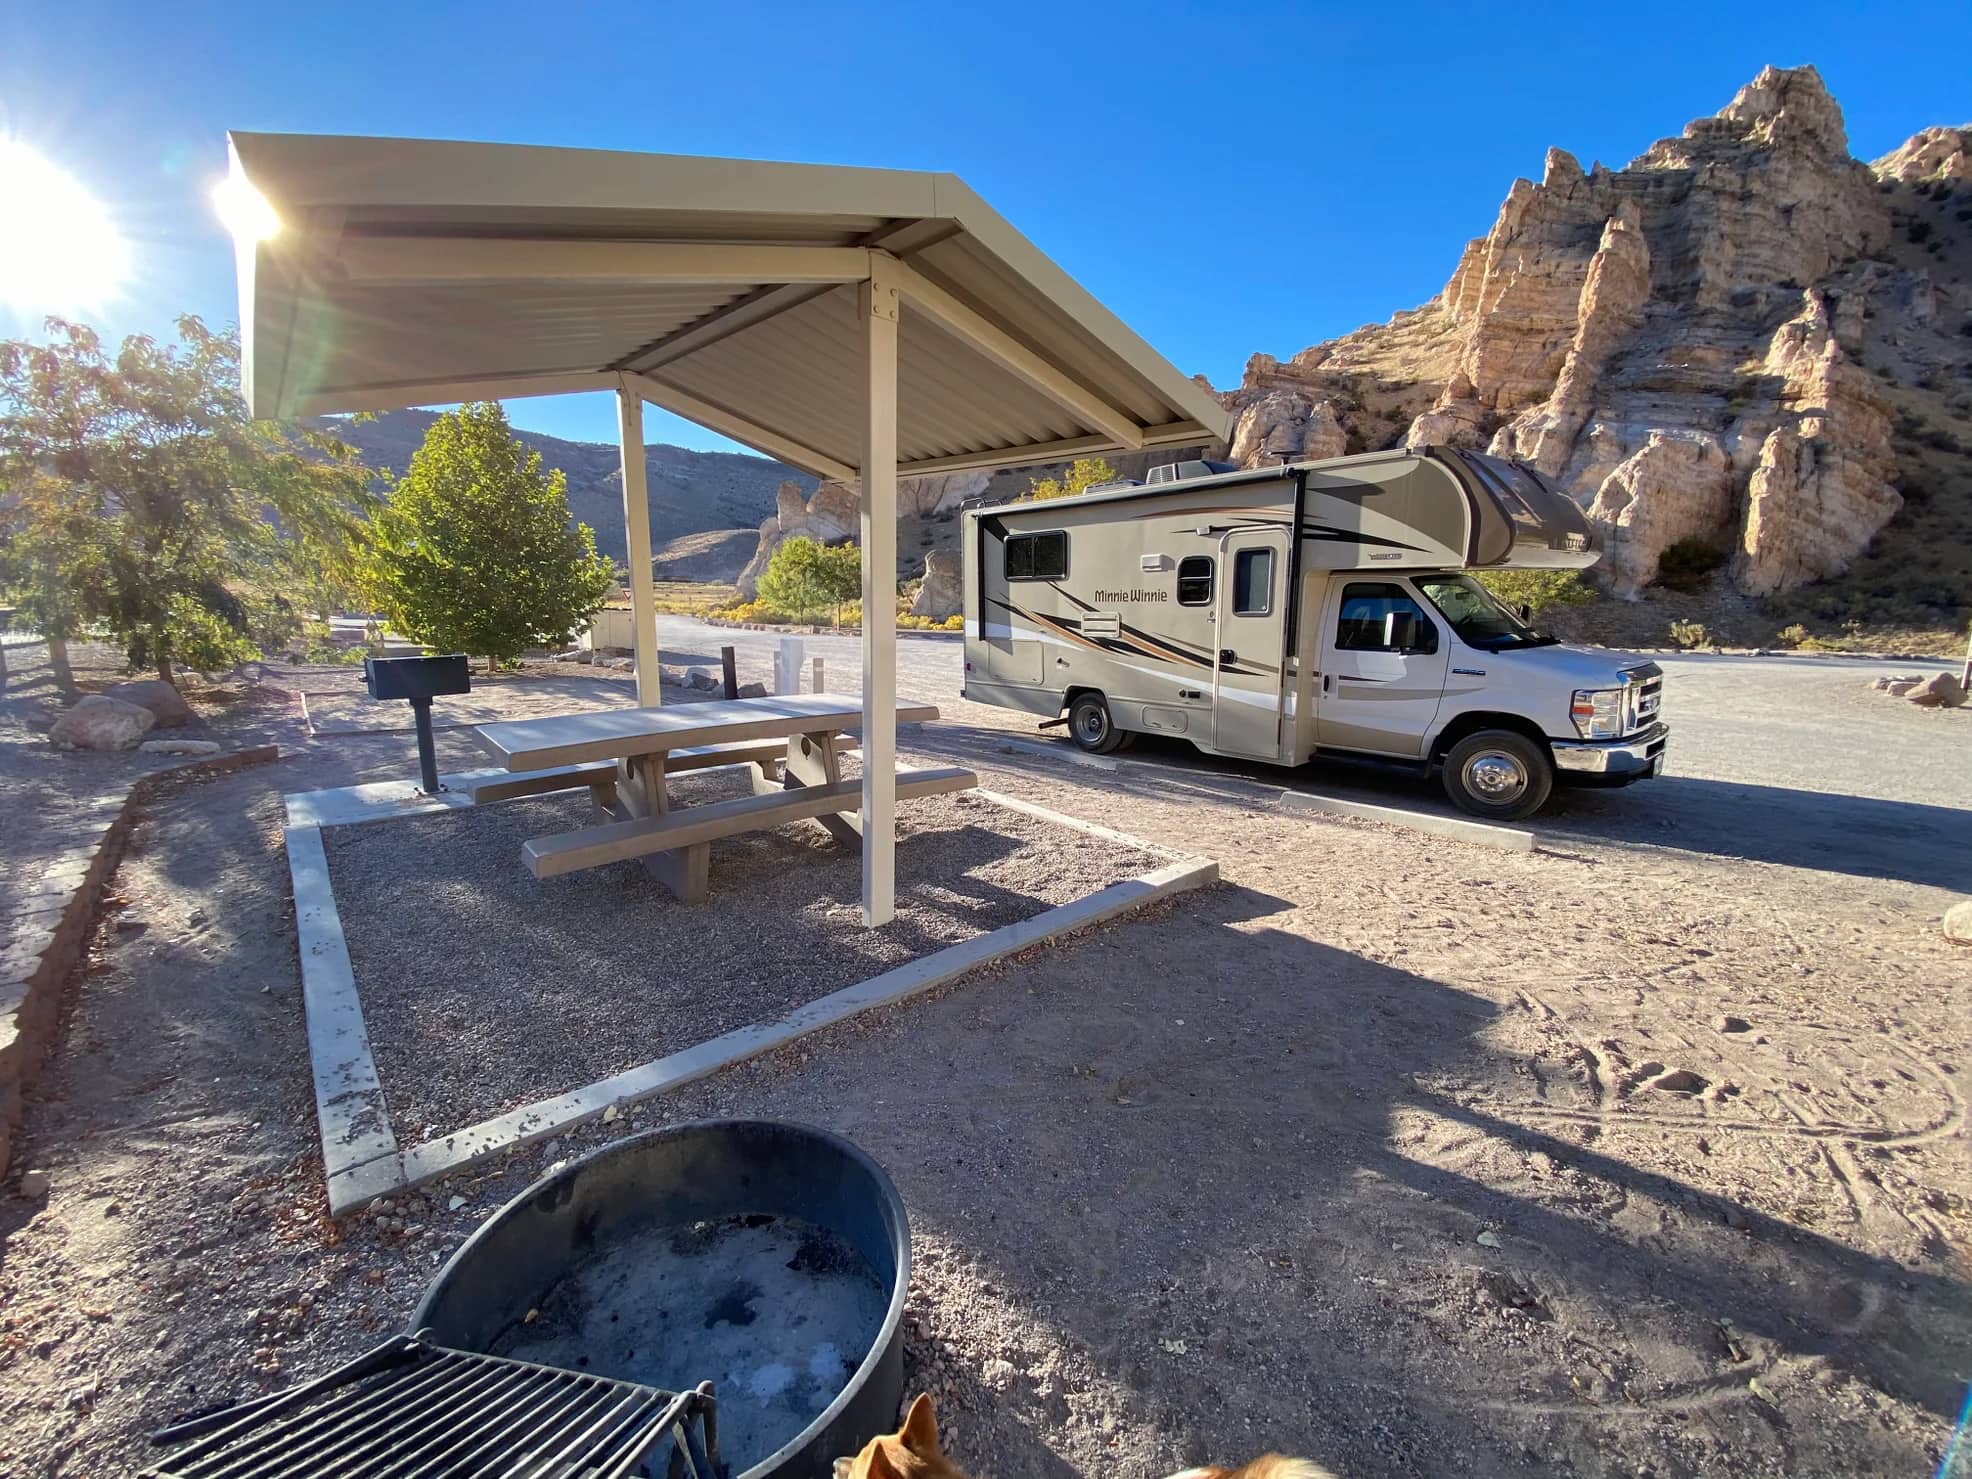 RV parked beside lean-to with picnic table and fire pit with jagged rocks in the distance.